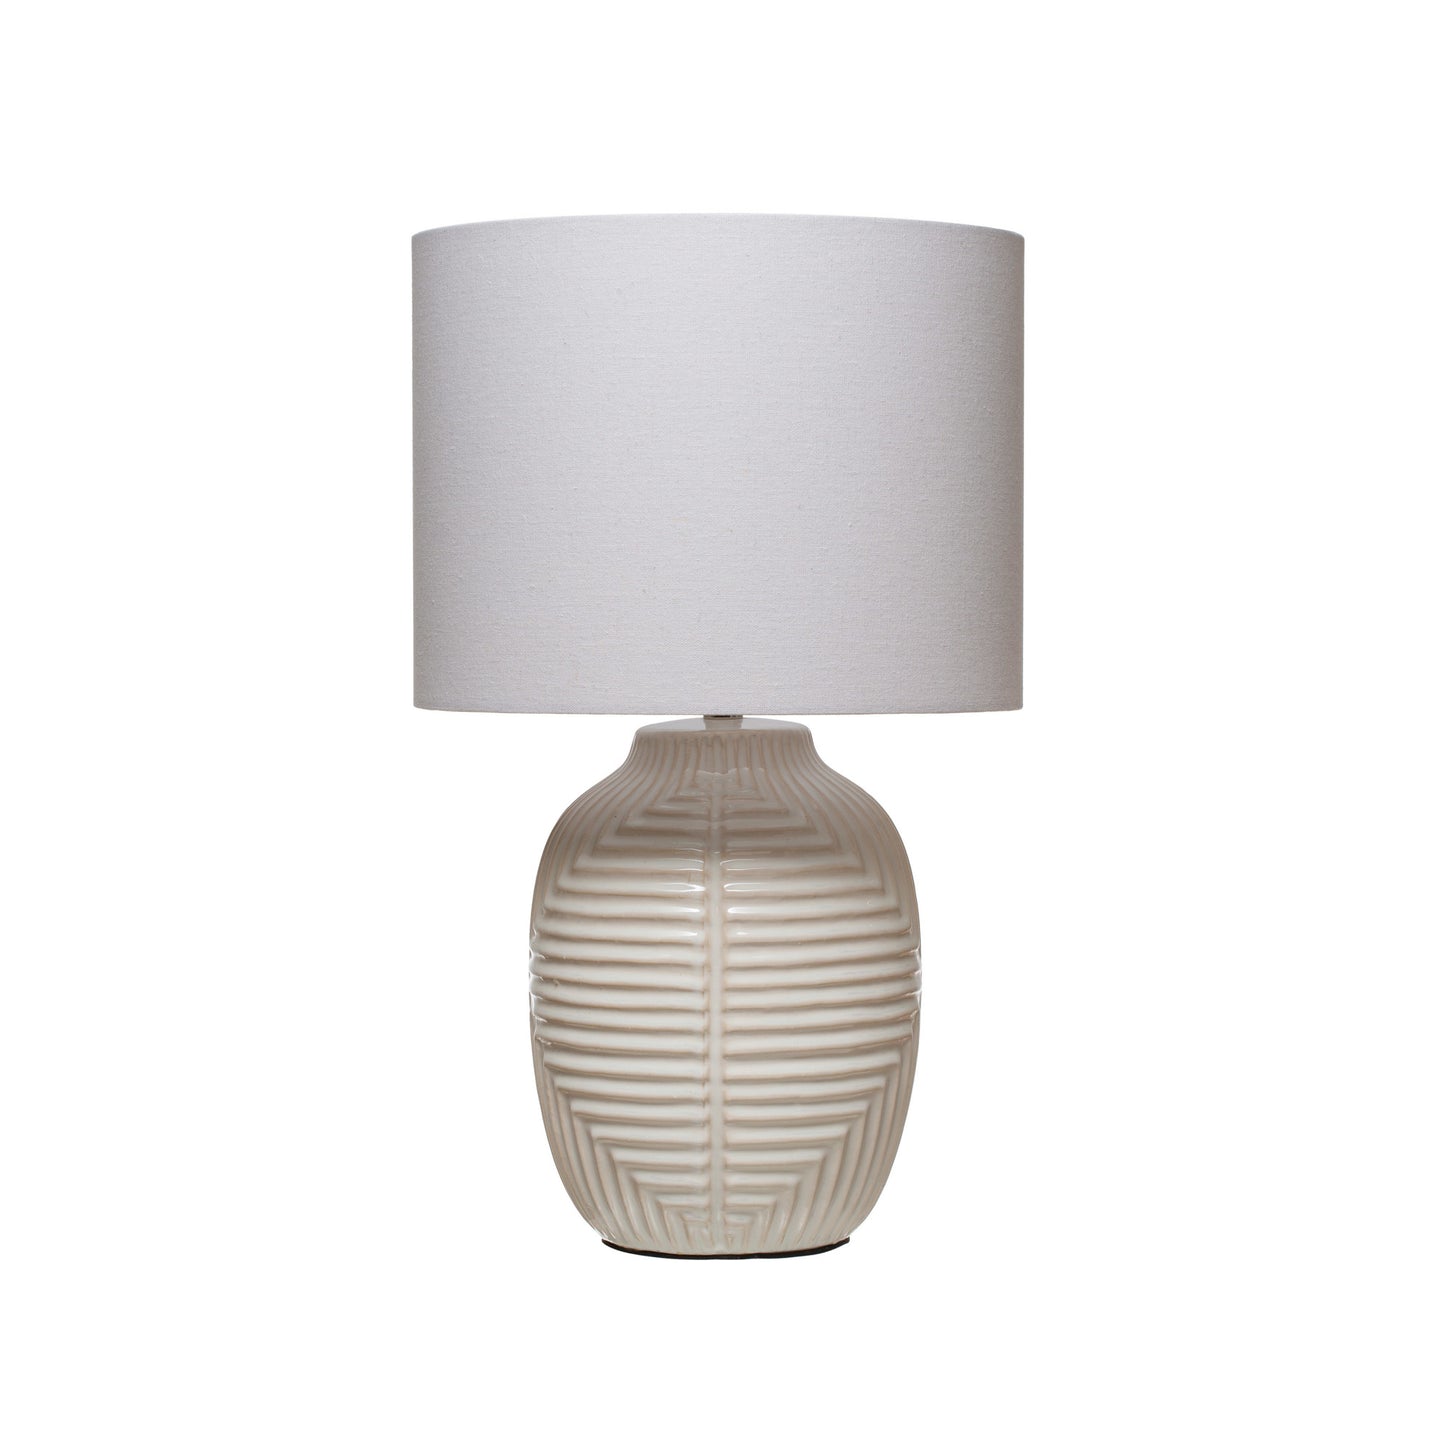 Lamp-Ceramic with Cotton Shade